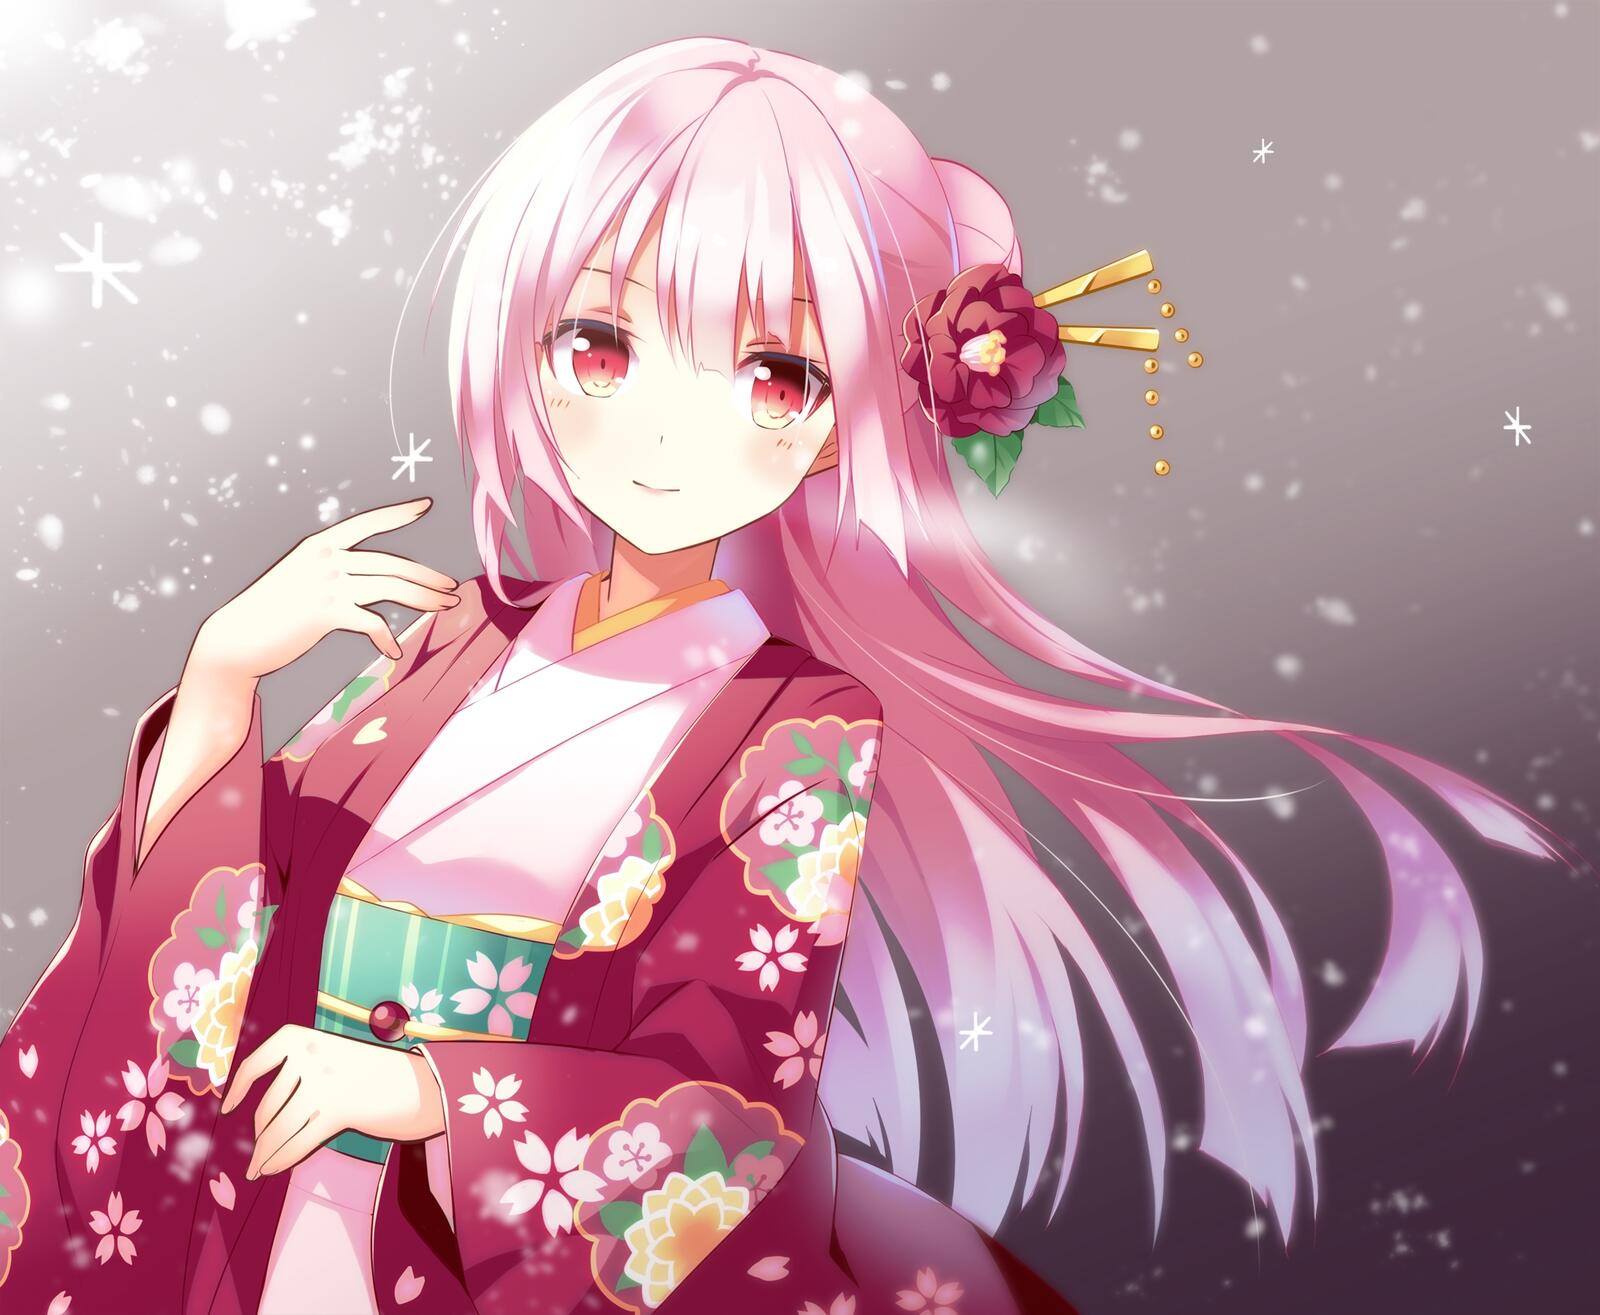 Free photo Anime girl with pink hair and pink robe